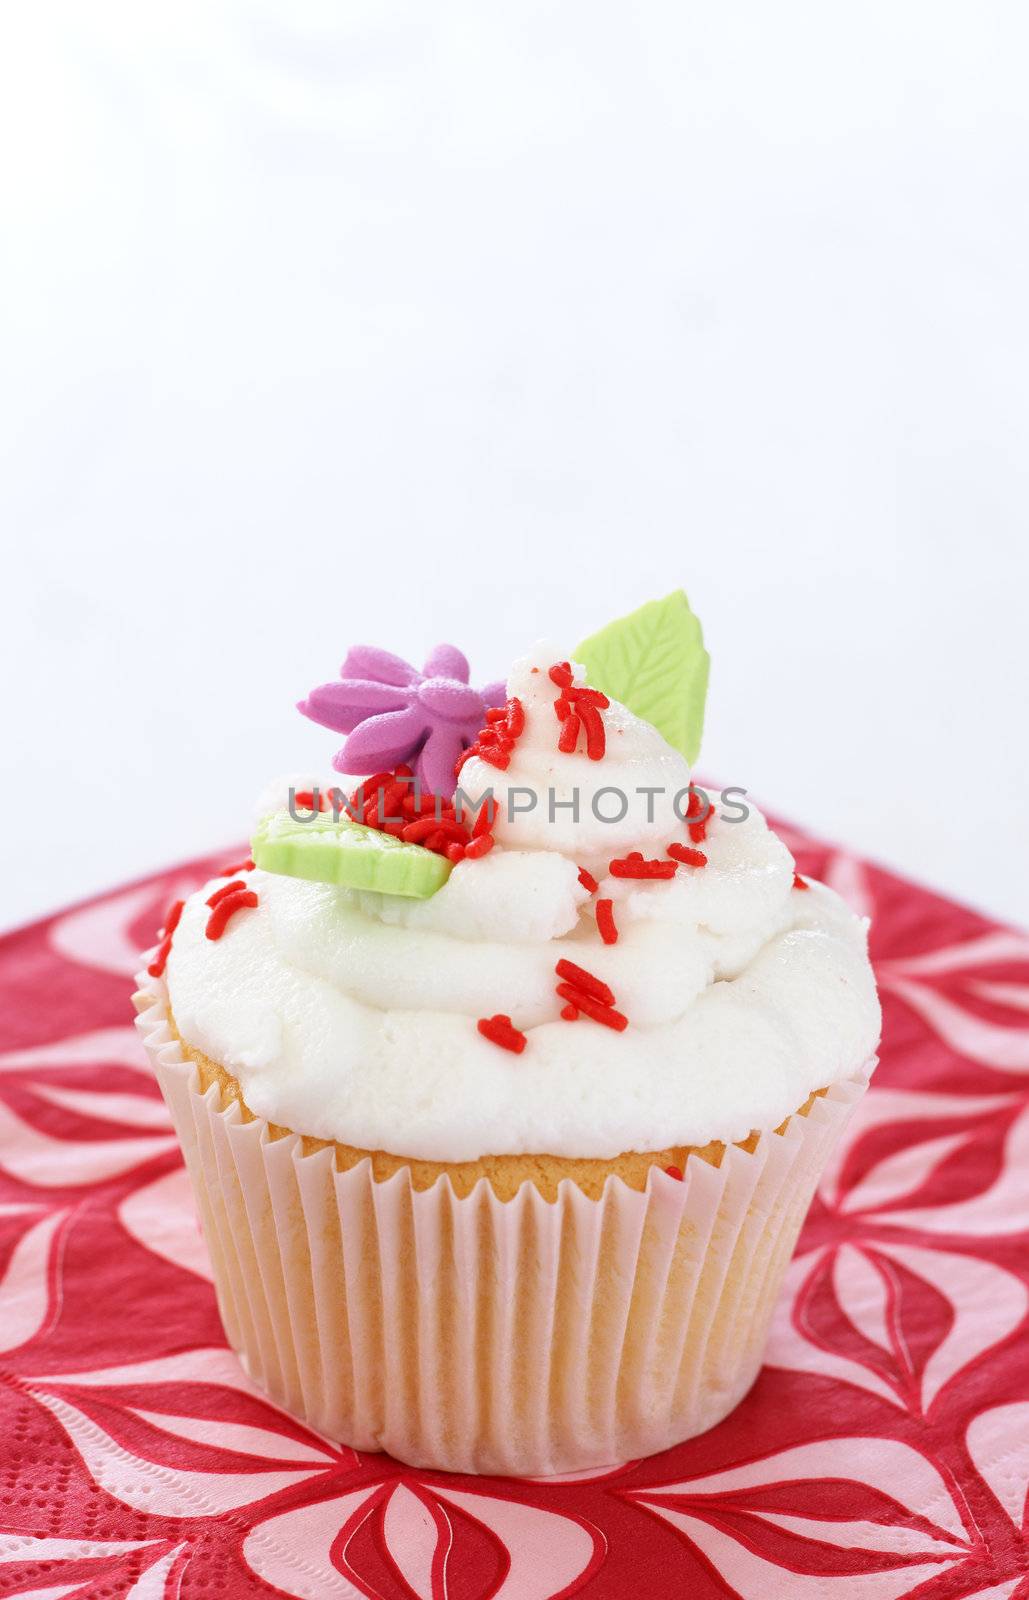 Vanilla cupcake with flower decorations by Elenat